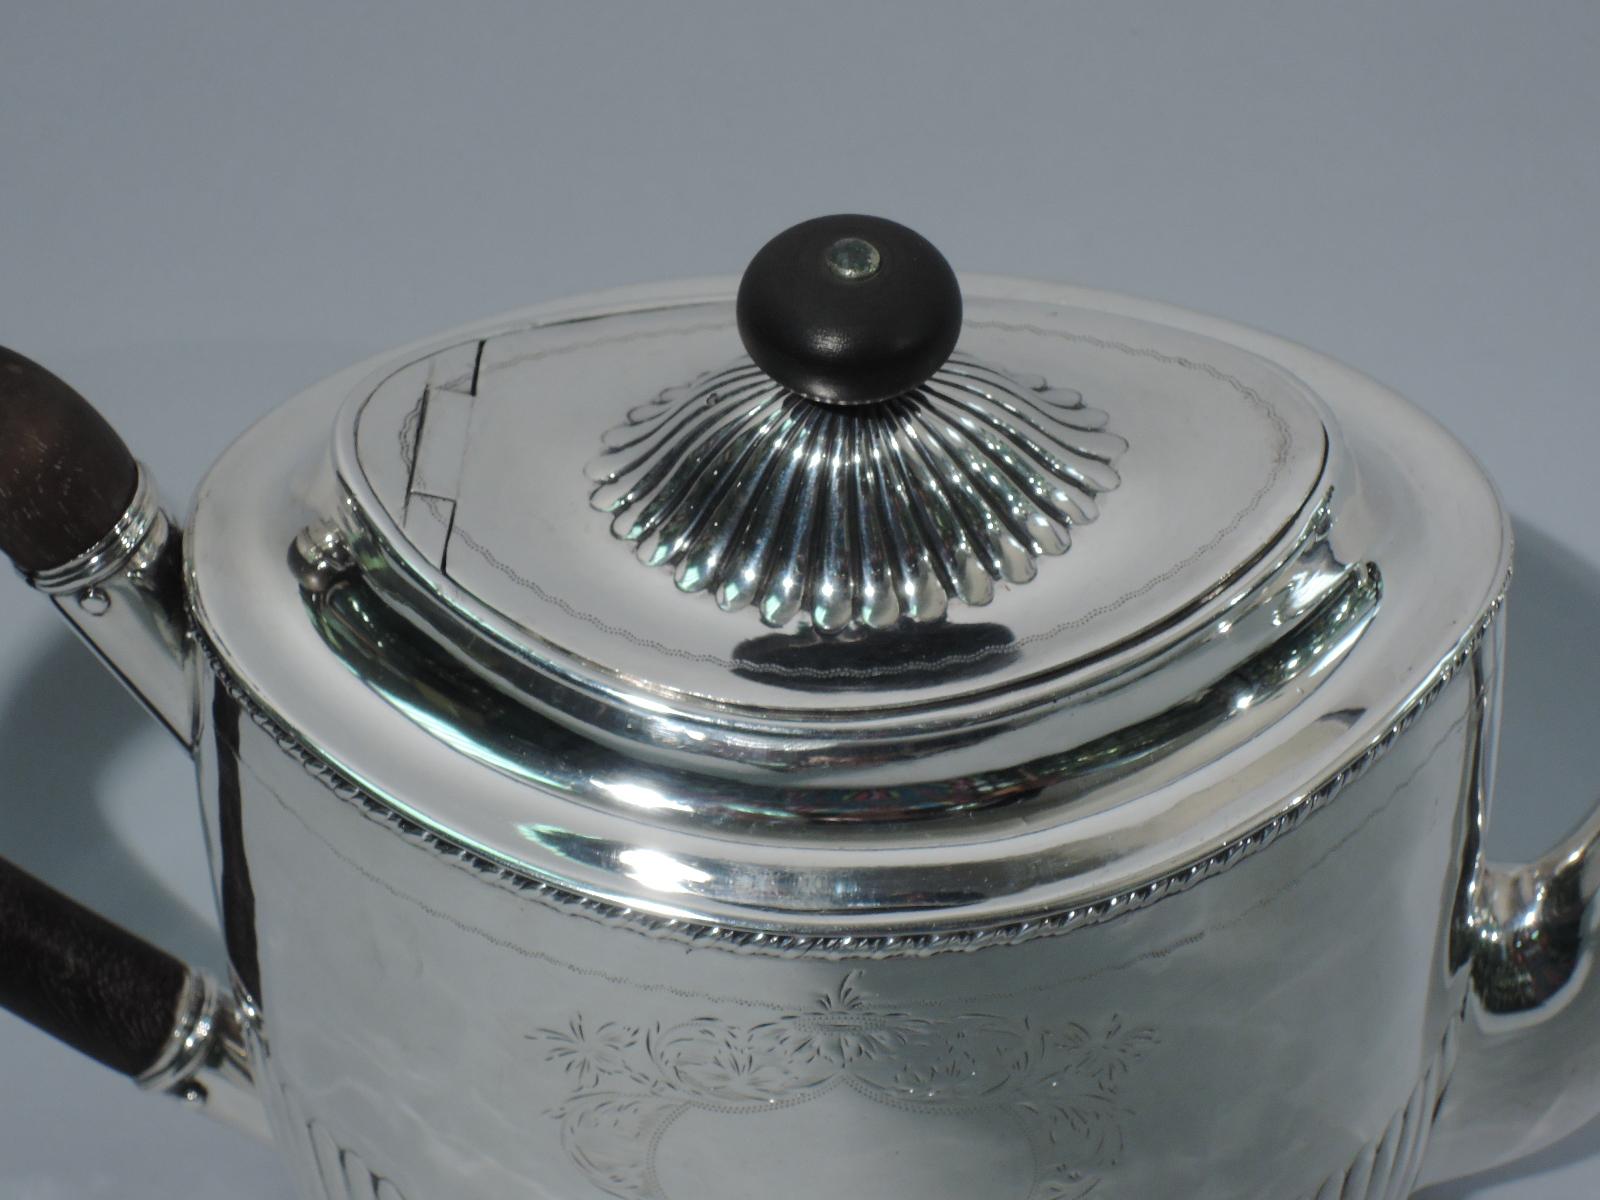 George III sterling silver teapot. Made by George Eadon & Co. in Sheffield in 1800. Ovoid with half fluting. Capped scroll handle in stained wood. S-scroll spout. Hinged cover with lobed dome and round stained-wood finial. Engraved heraldic